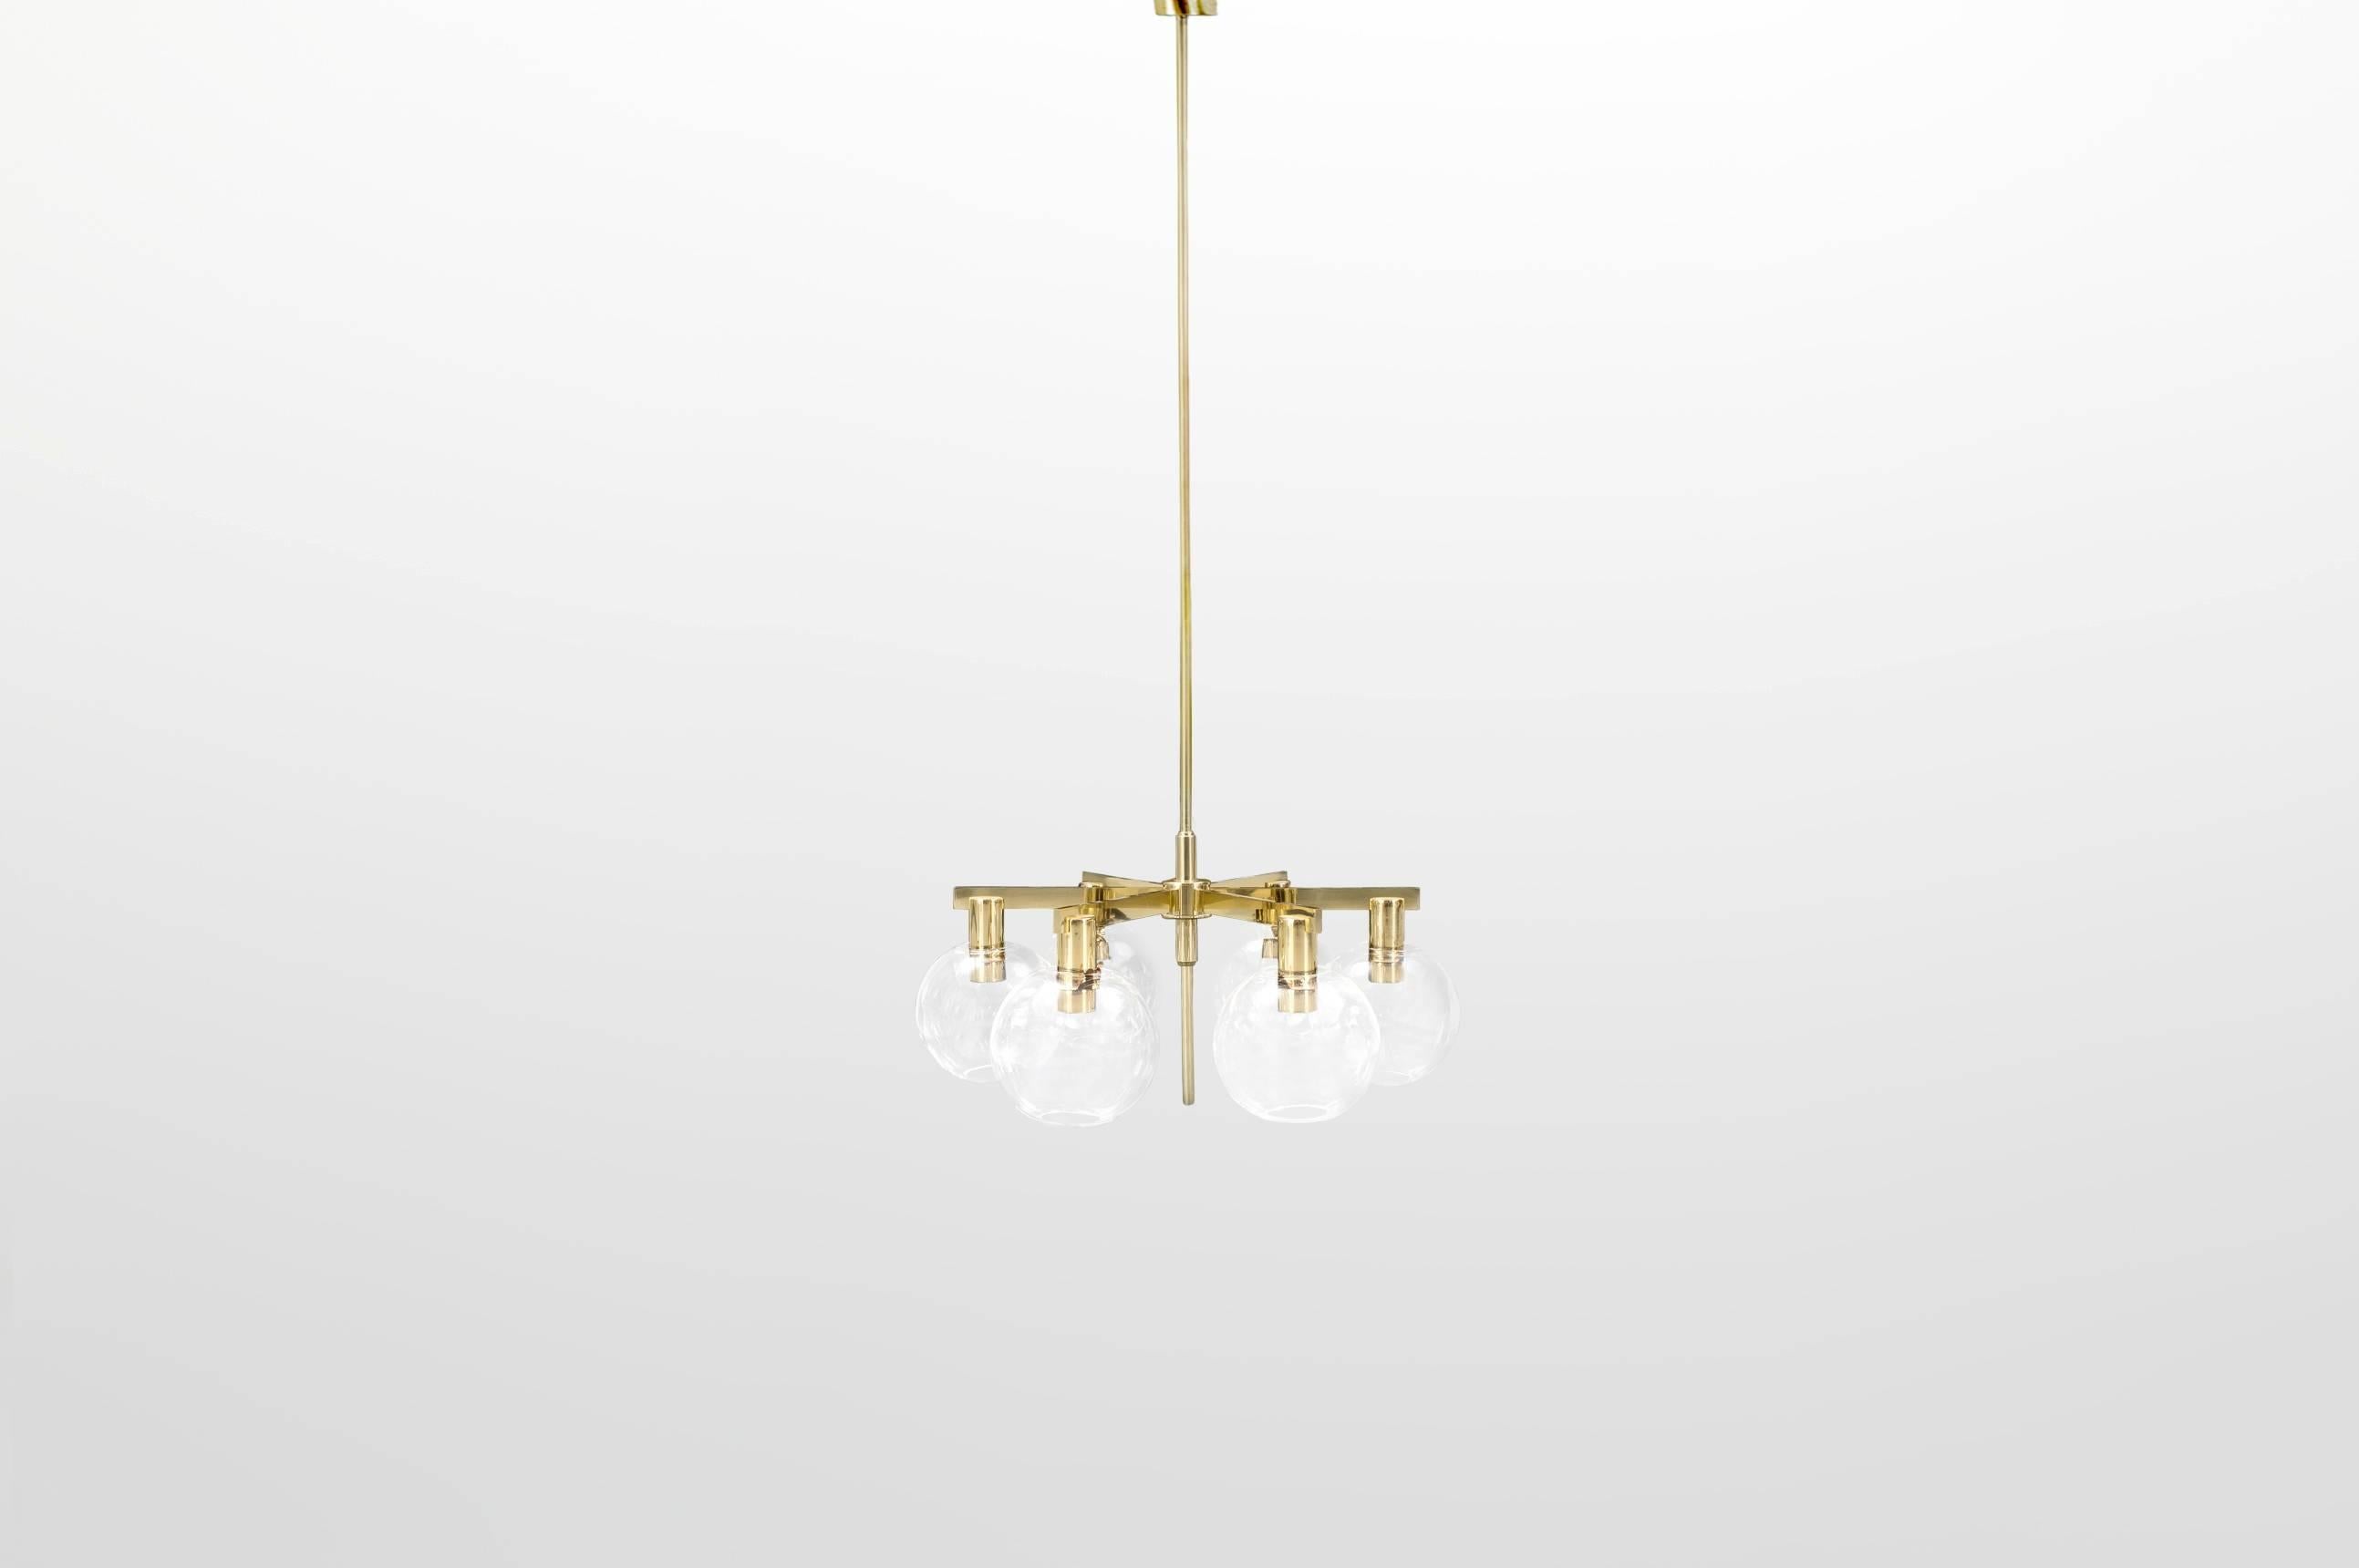 Hans-Agne Jakobsson (1919-2009).

Pair of ceiling lamp, model “T348/6 Pastoral.”
Manufactured by Hans-Agne Jakobsson AB.
Markaryd, Sweden, 1959.
Brass and blown glass.
Ceiling Lamp Pendants